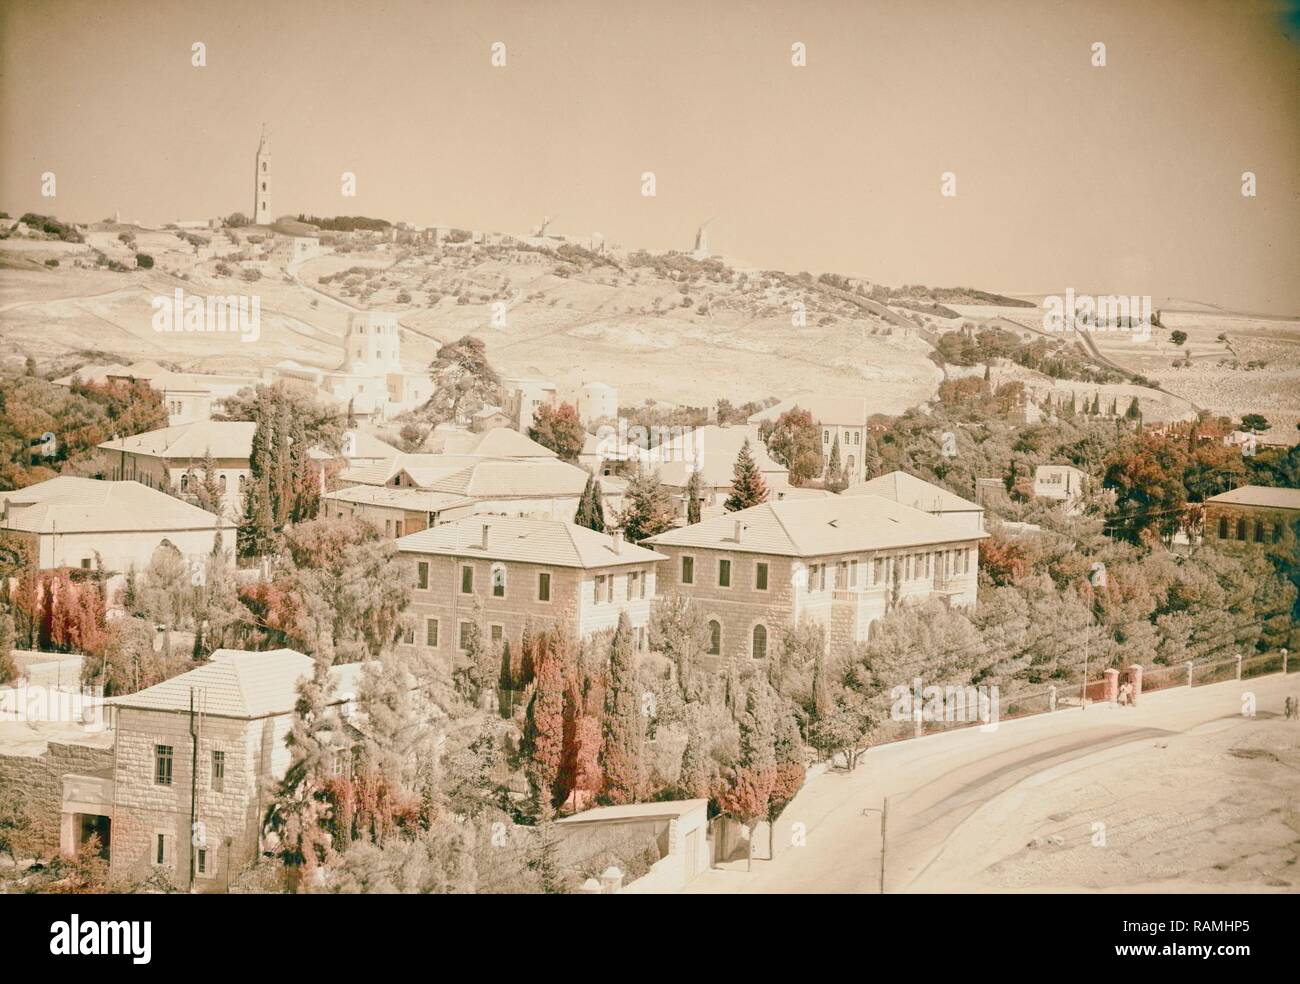 American School of Oriental Research & Olivet, from St. George's Cathedral  Tower. 1940, Jerusalem, Israel. Reimagined Stock Photo - Alamy